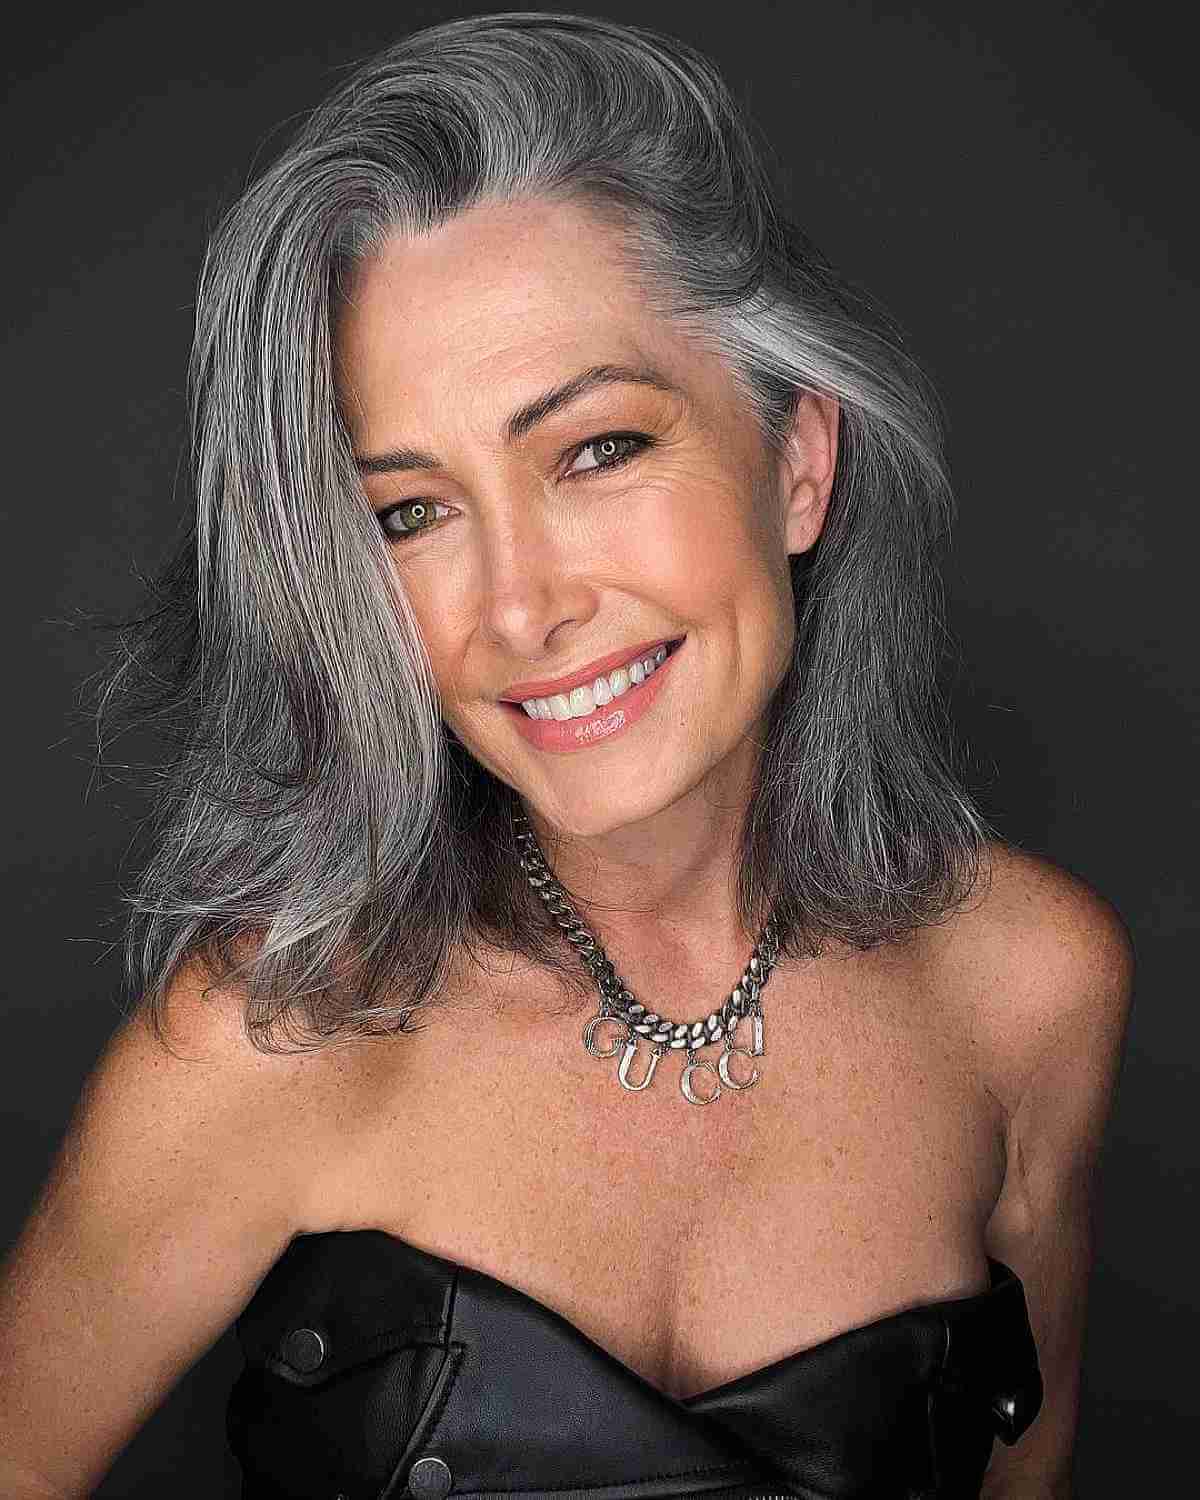 Collarbone-Length Cut on Salt and Pepper Hair for Women 50 and Up